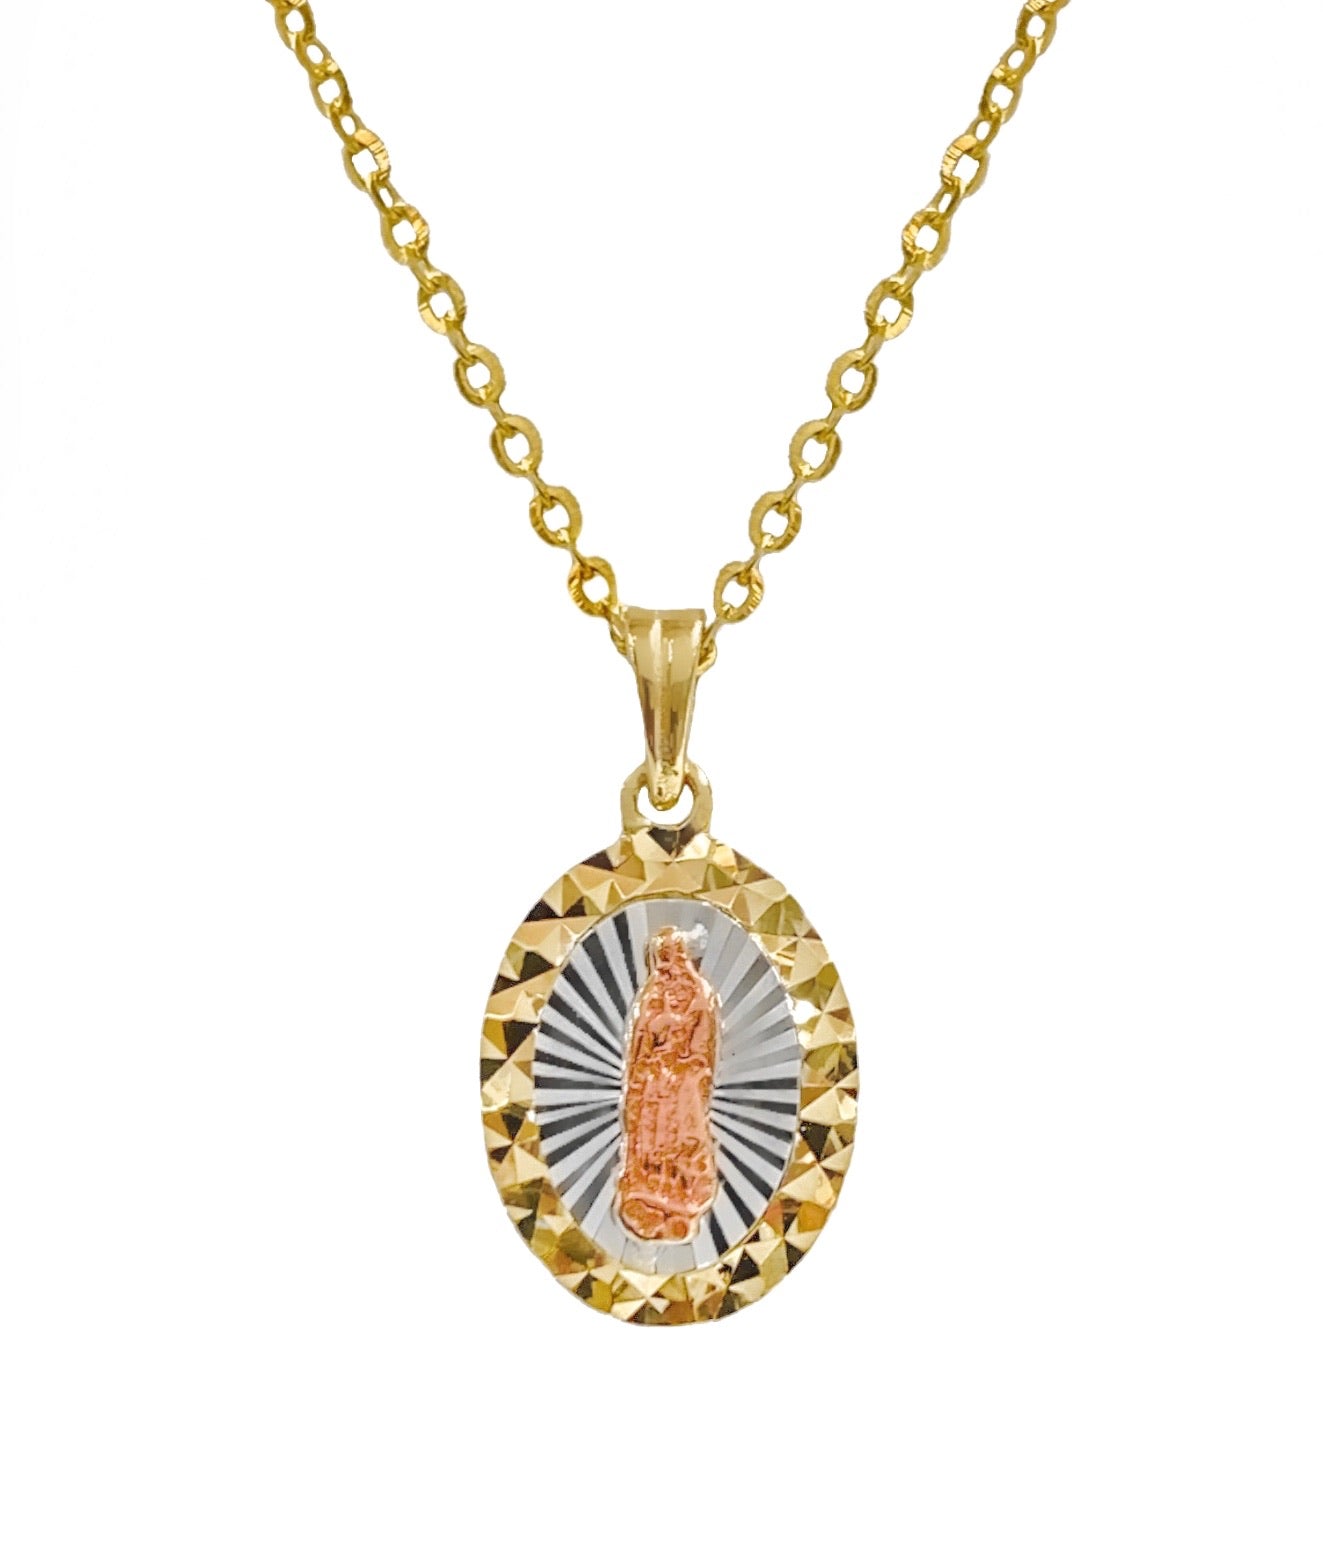 14K YELLOW GOLD OVAL VIRGIN MARY NECKLACE